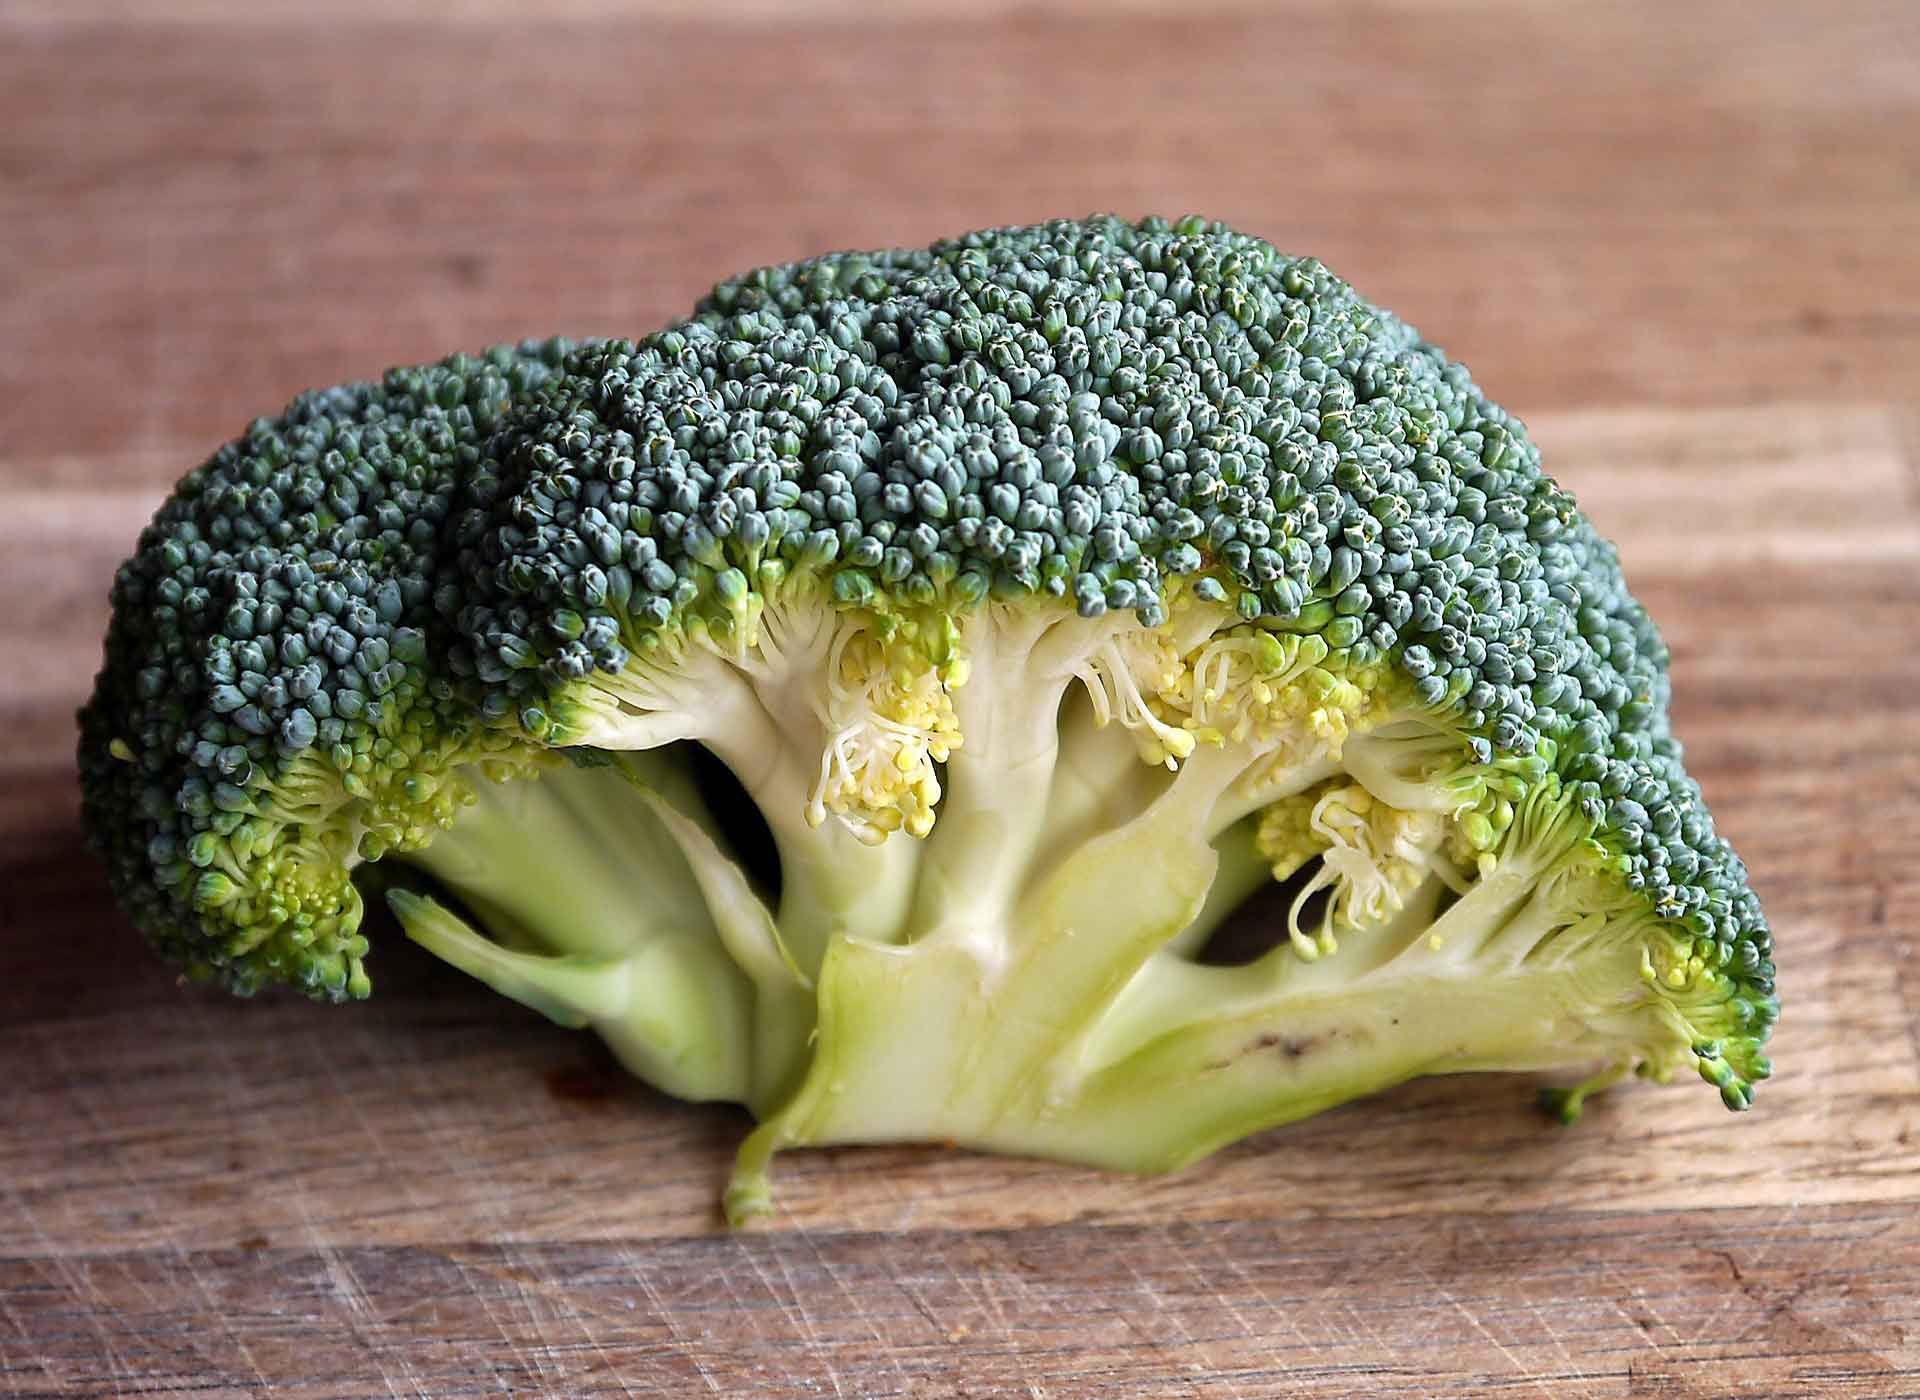 Sorry Kids, British Scientists Are Growing Super Broccoli